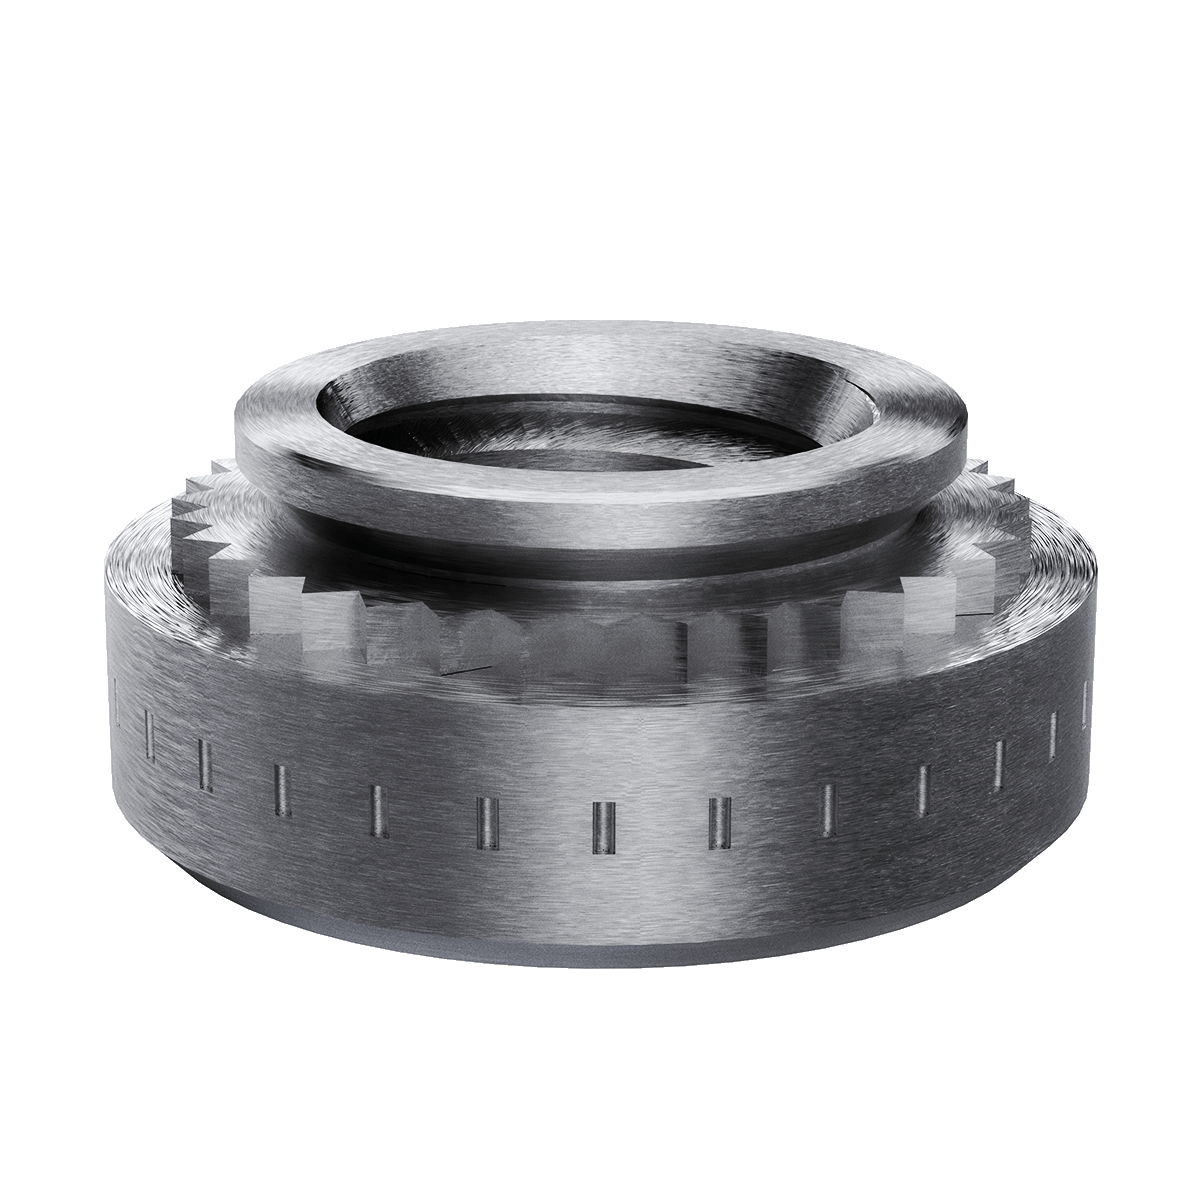 Self-Clinching Nut, For SS, 17-4 Stainless Steel, Passivated, 6-32 x 0, 100 Pack